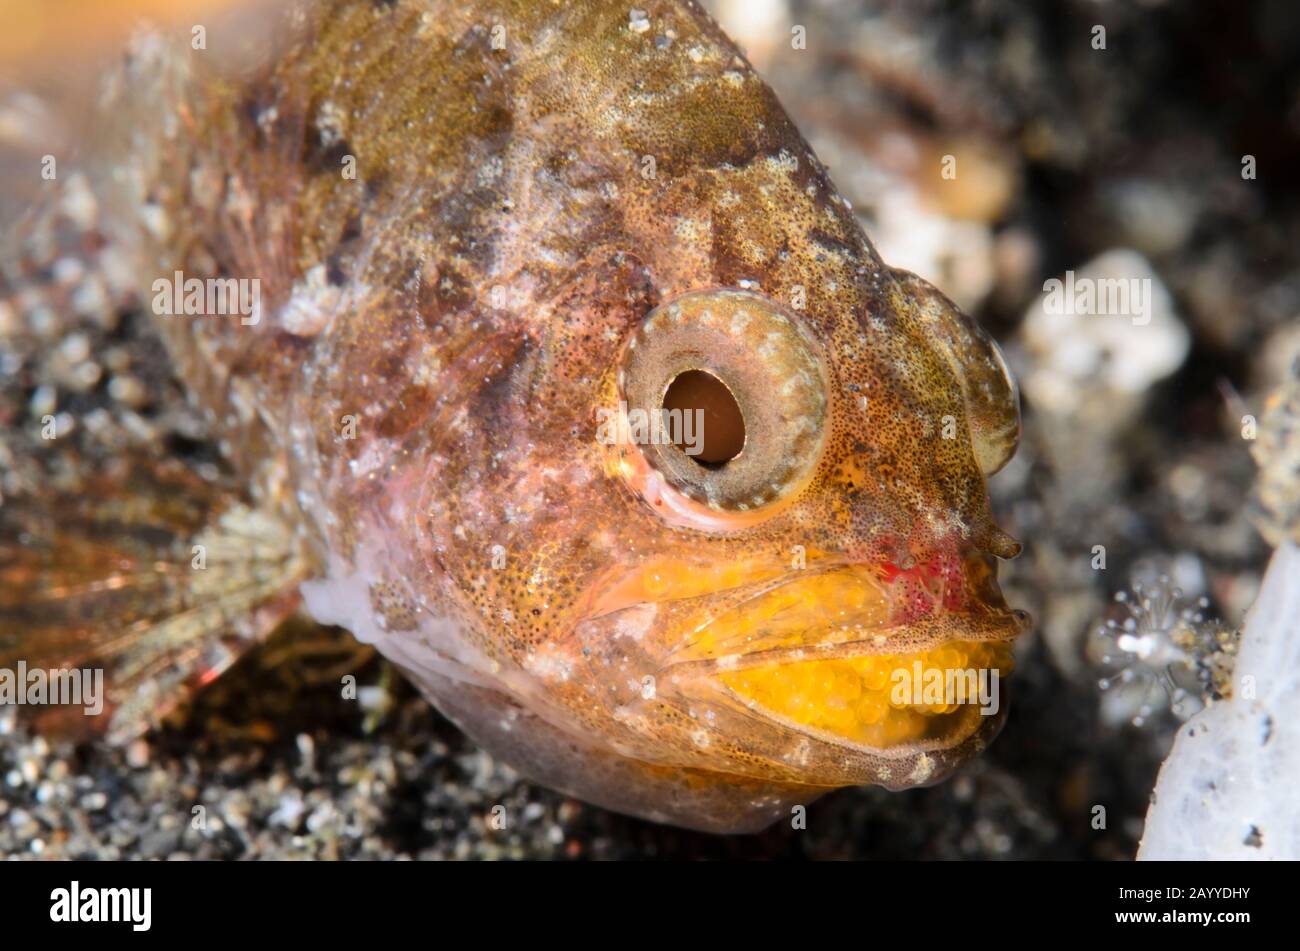 Weedy Cardinalfish, Foa fo,  adult male,  protectively carrying eggs in mouth, Lembeh Strait, North Sulawesi, Indonesia, Pacific Stock Photo